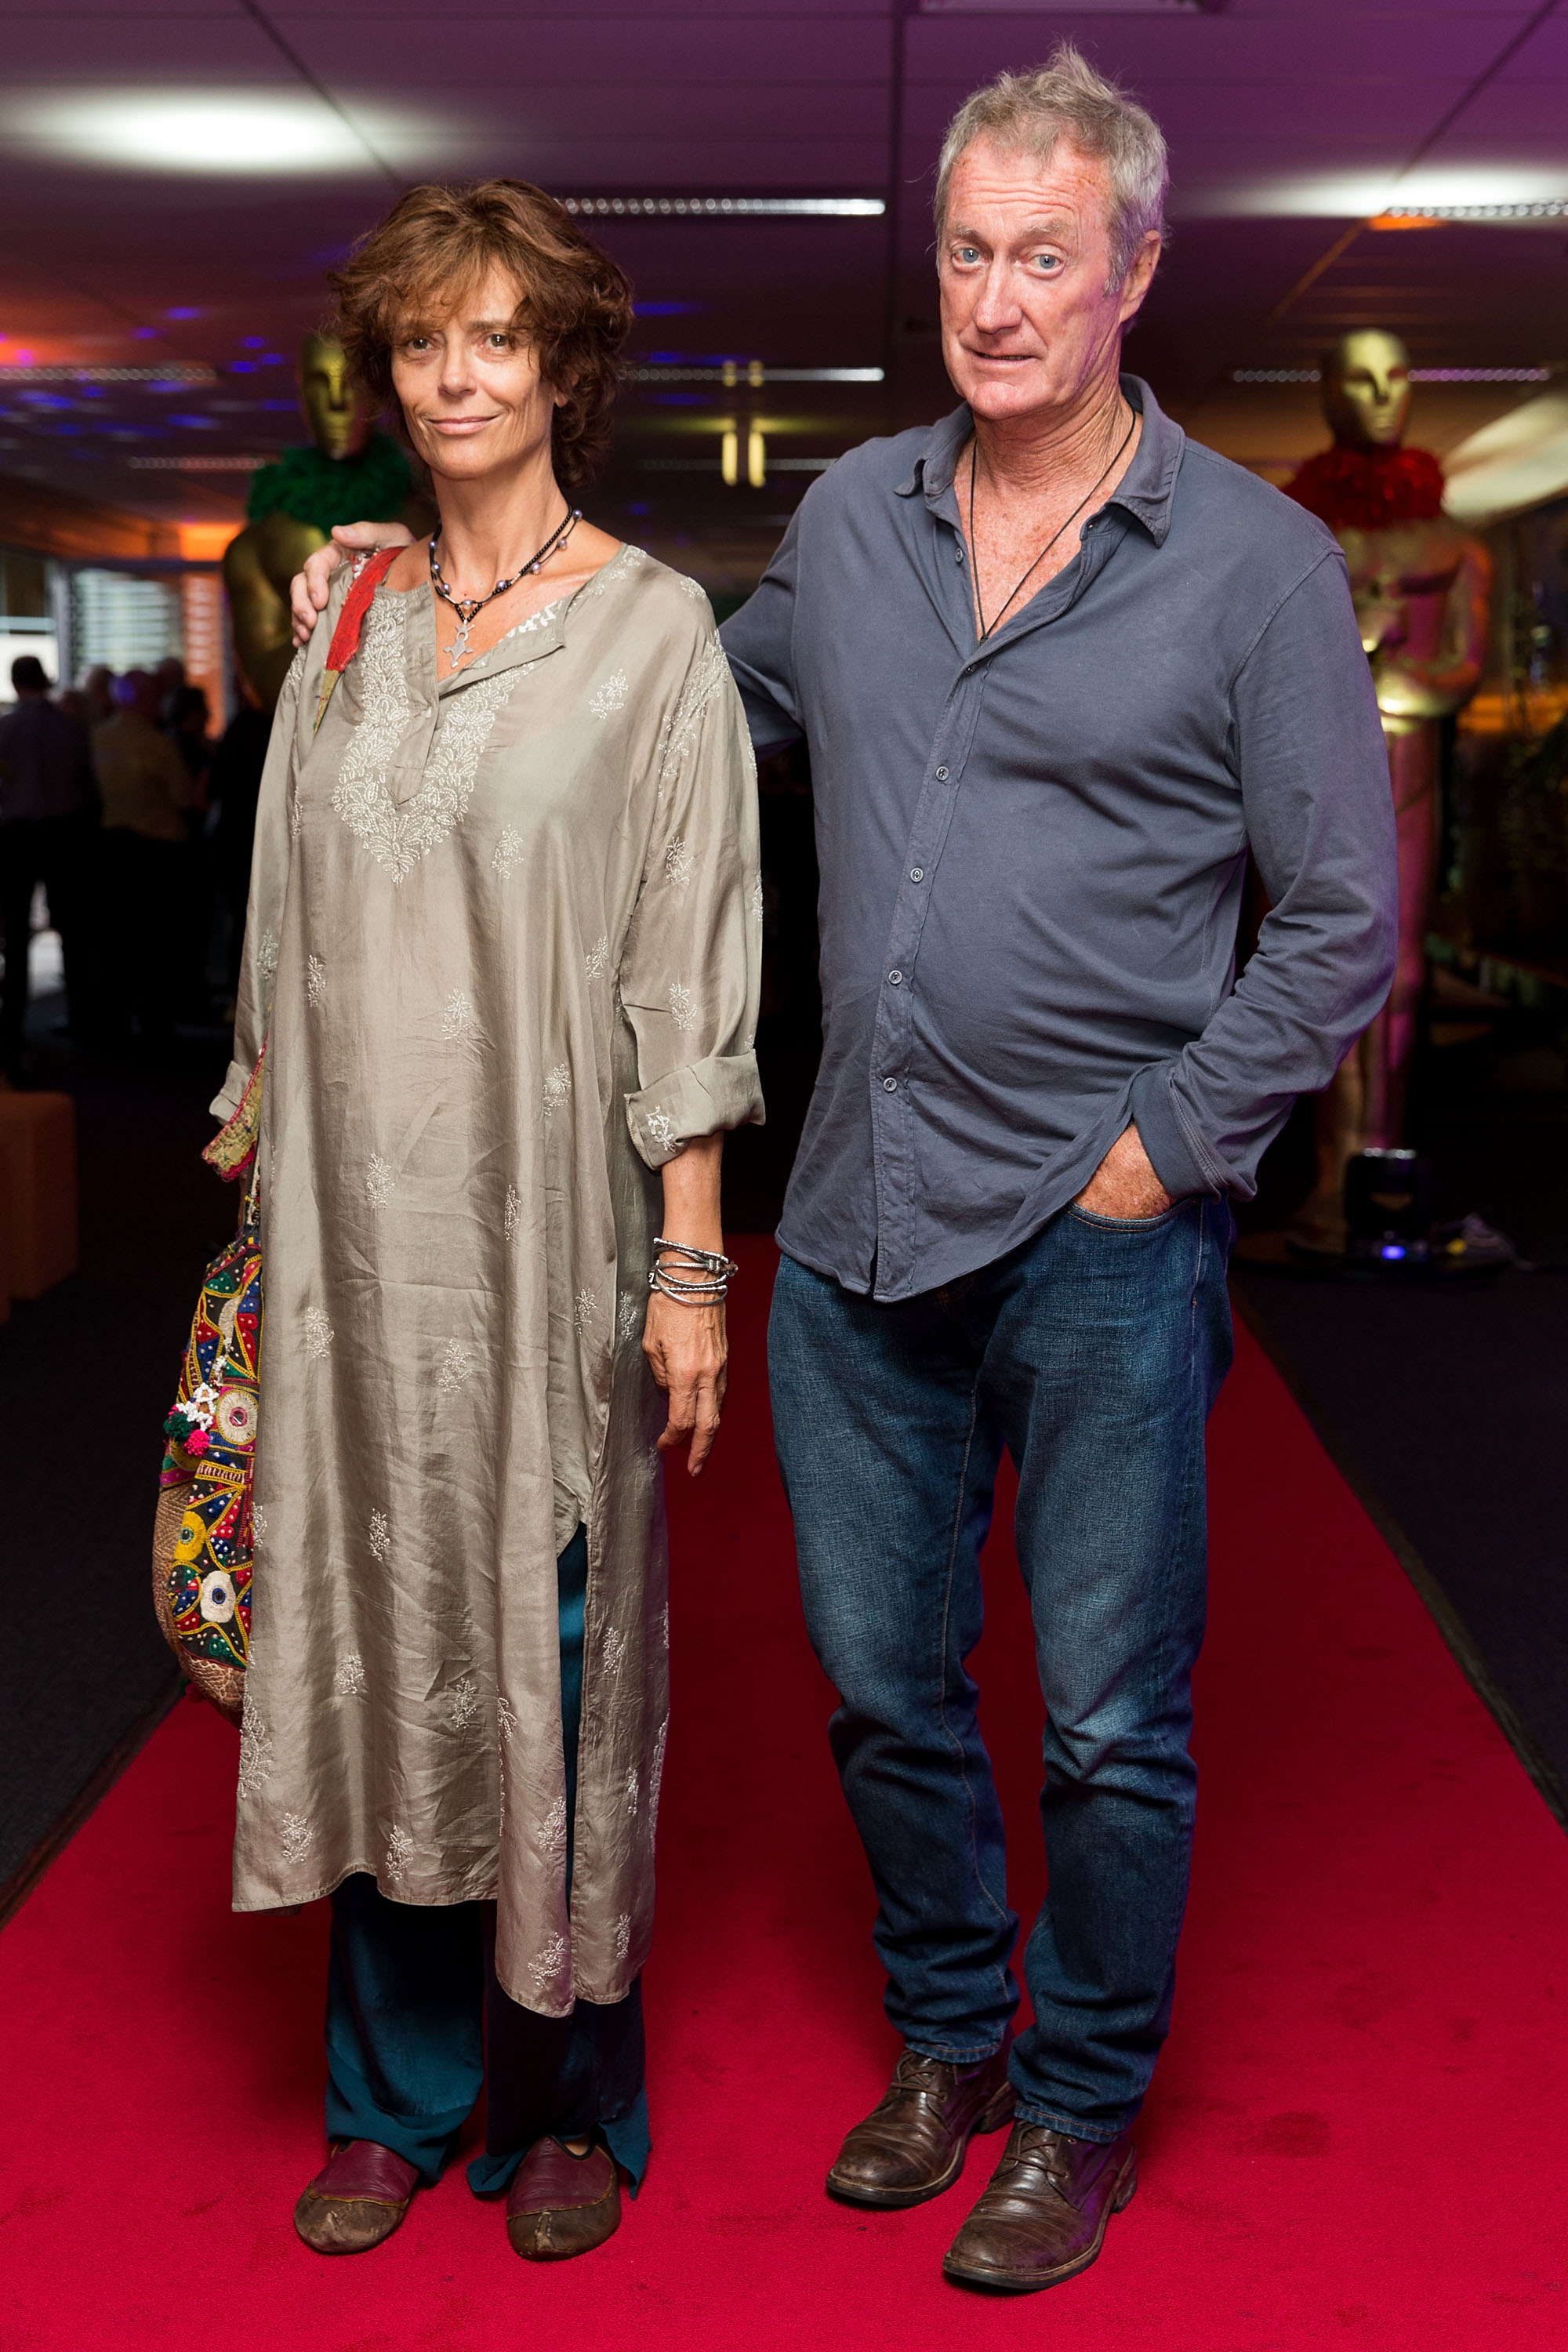 Bryan Brown and Rachel Ward at the "At the Movies" farewell party in December 2014 in Sydney, Australia | Source: Getty Images